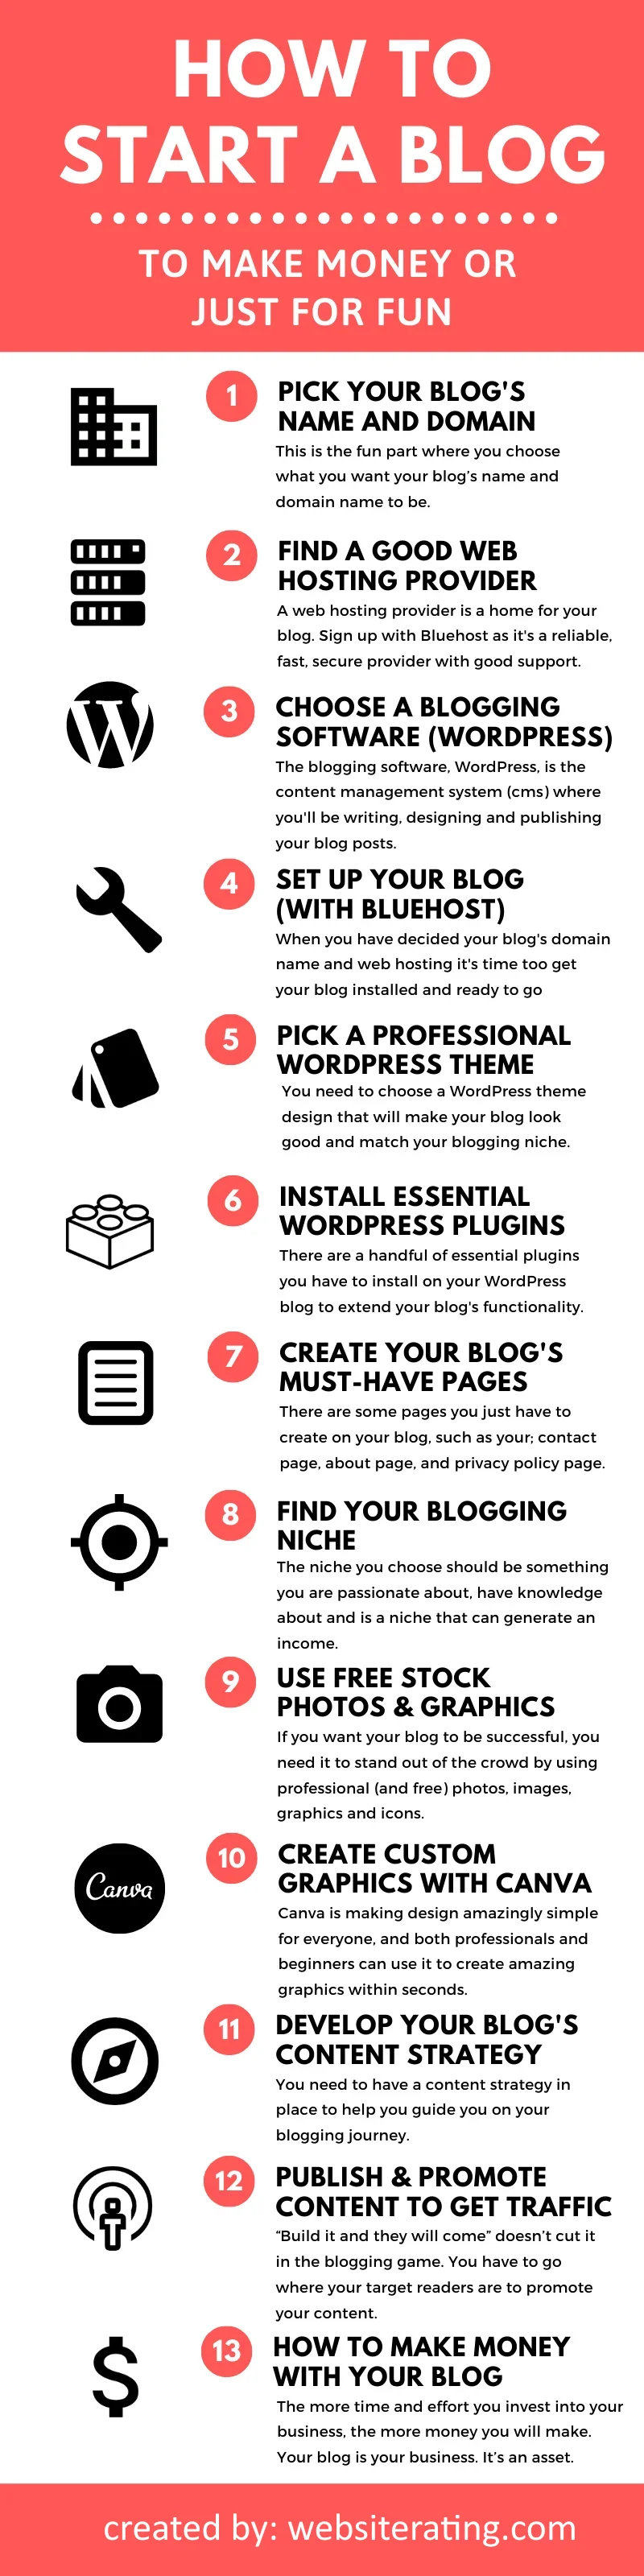 how to start a blog - infographic